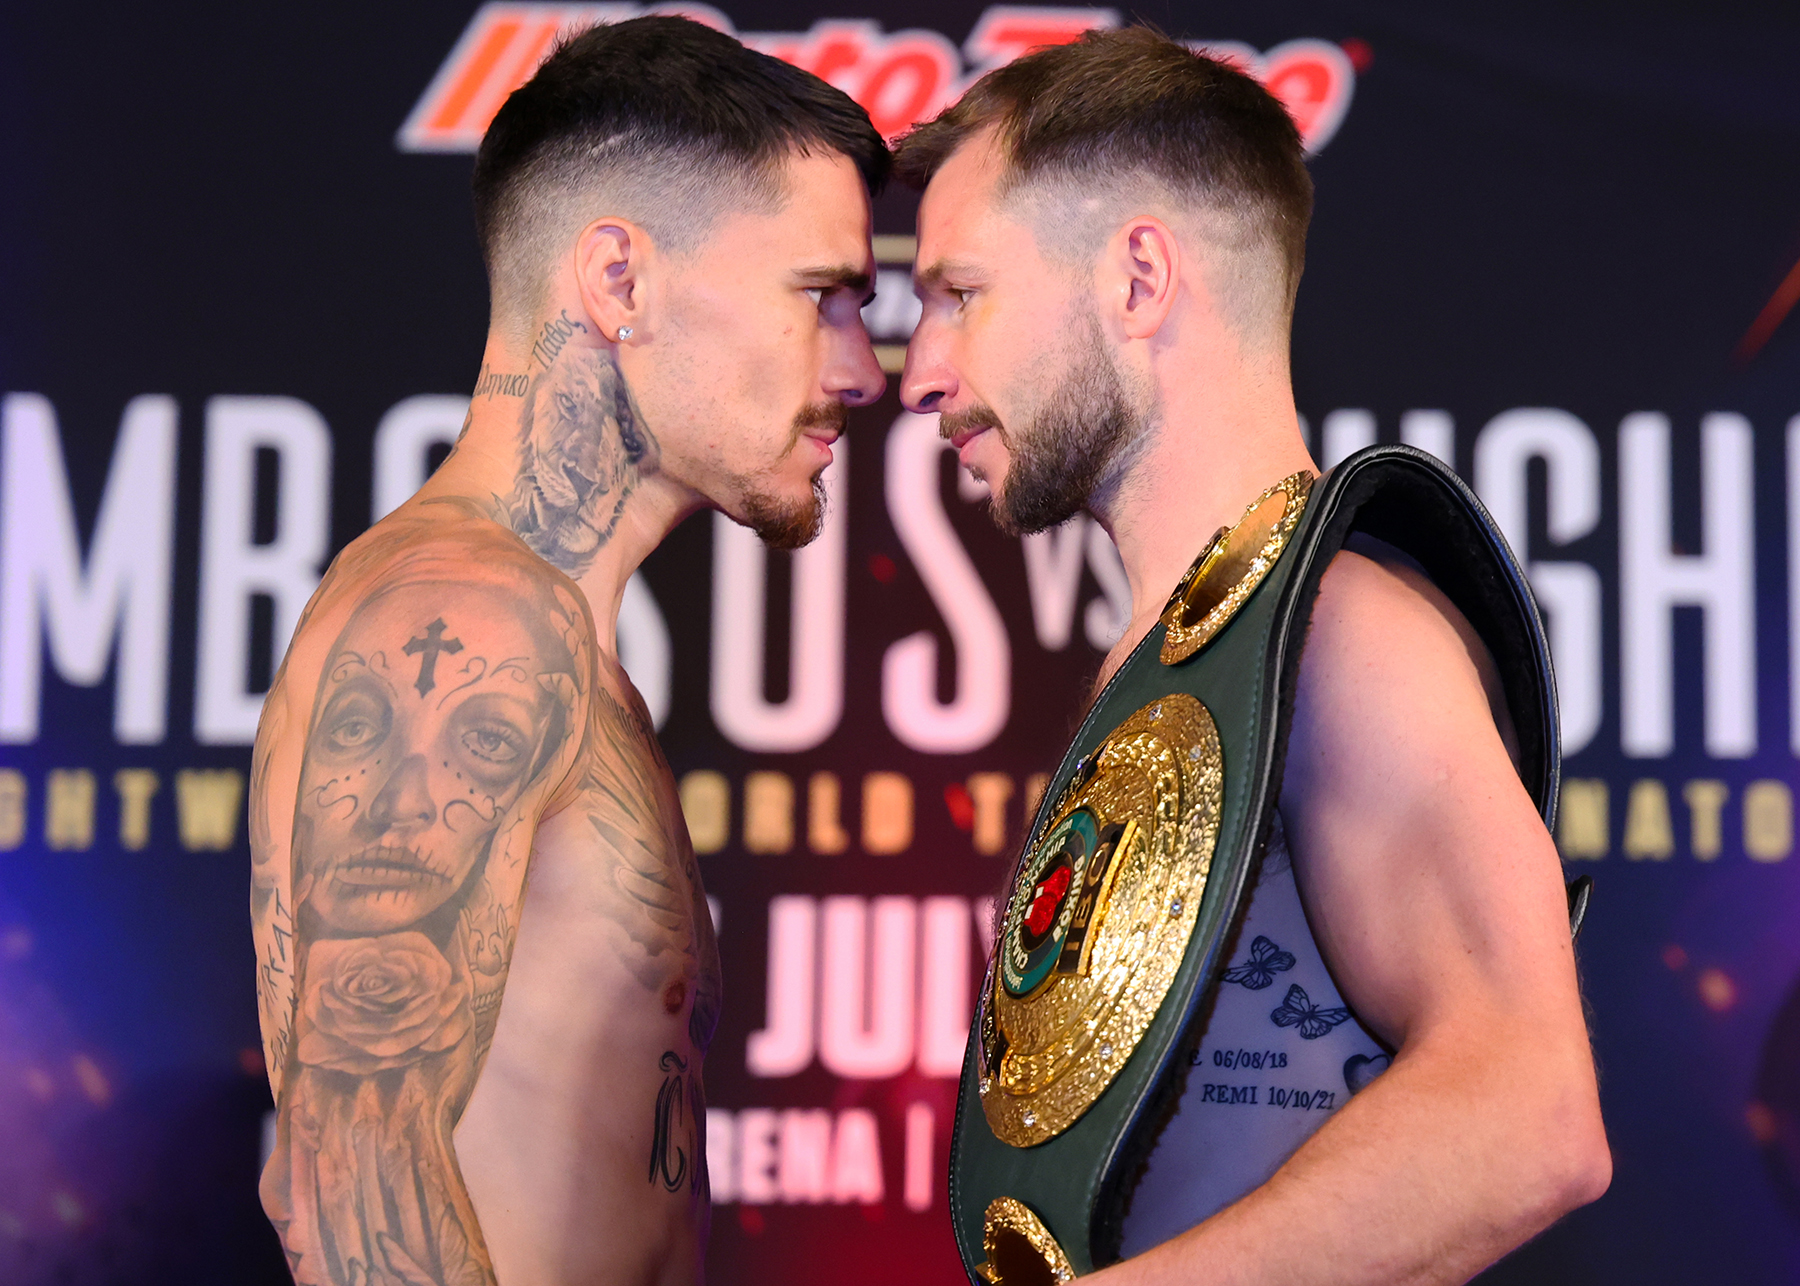 George Kambosos Jr. vs. Maxi Hughes: Weigh-In Results & Betting Odds